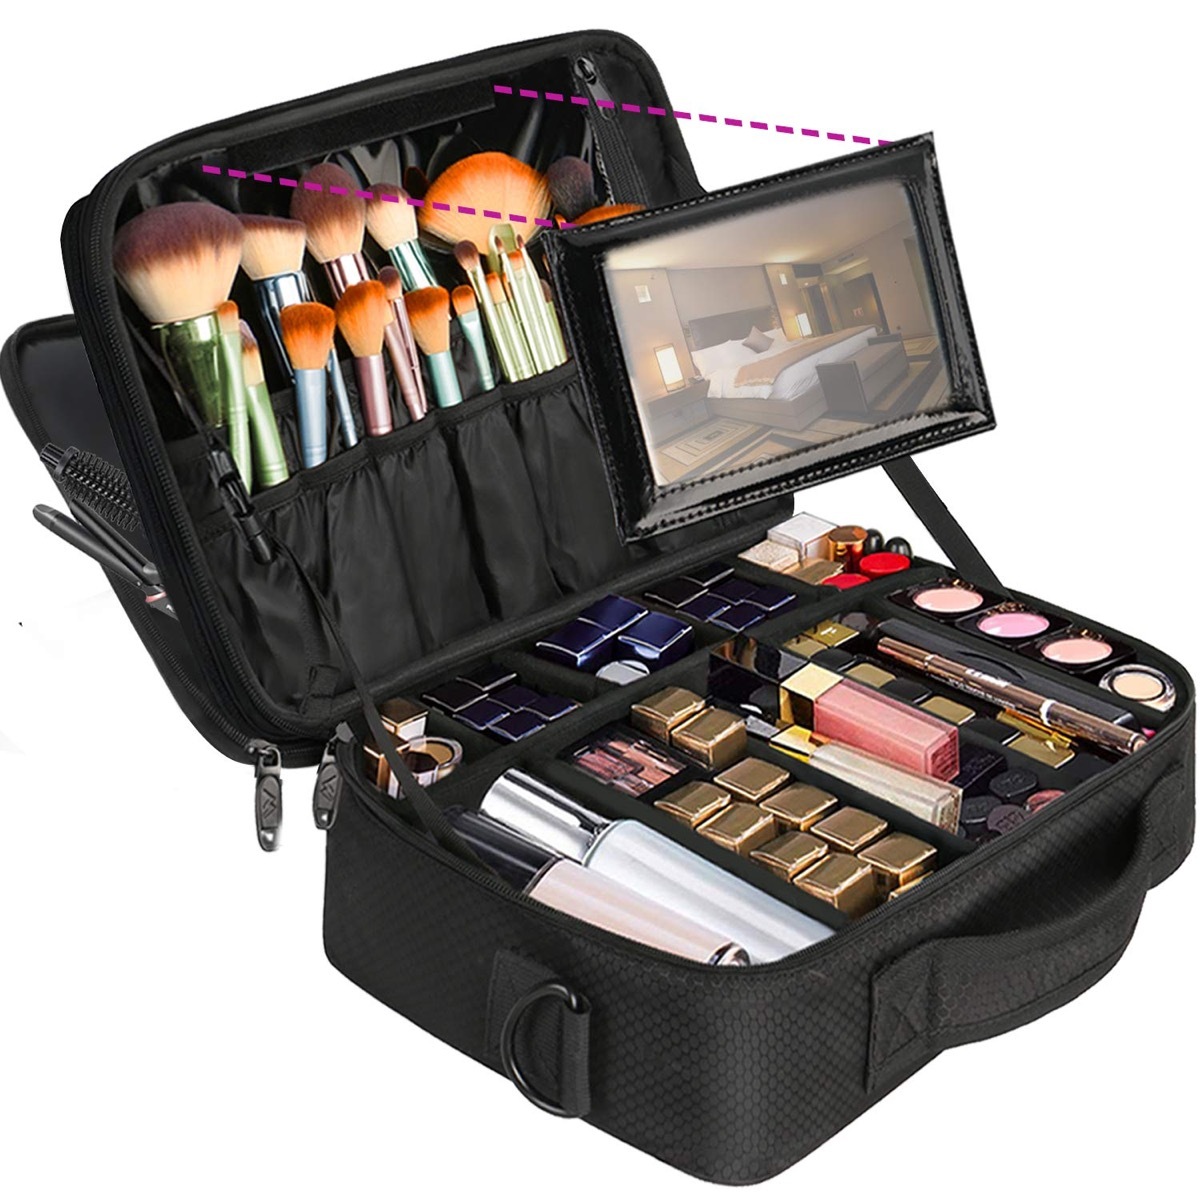 Black makeup kit full of products